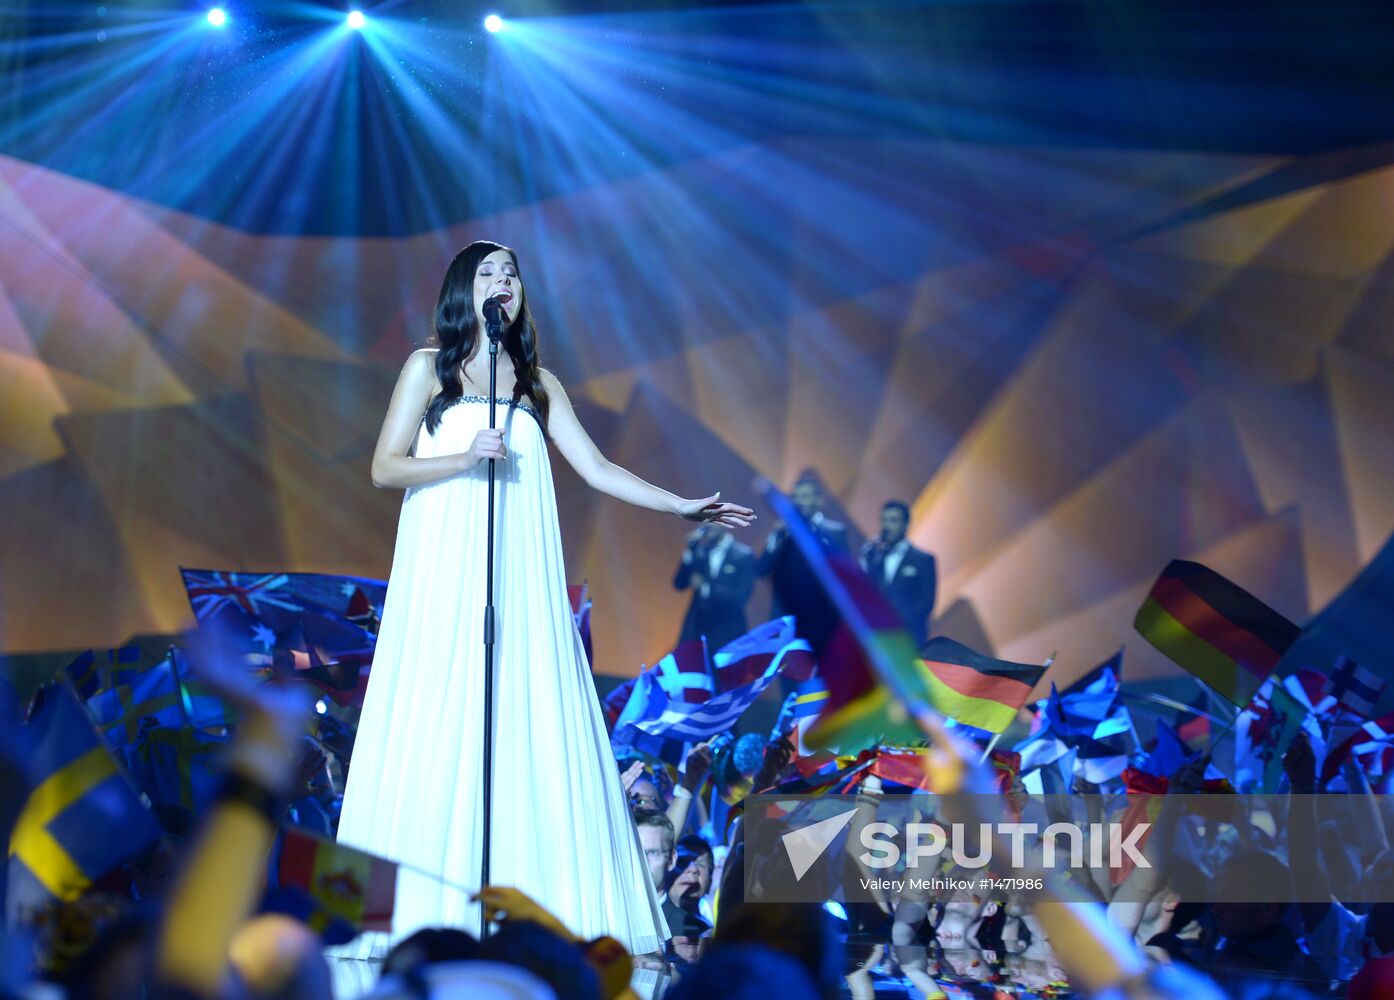 Final of Eurovision-2013 international song contest